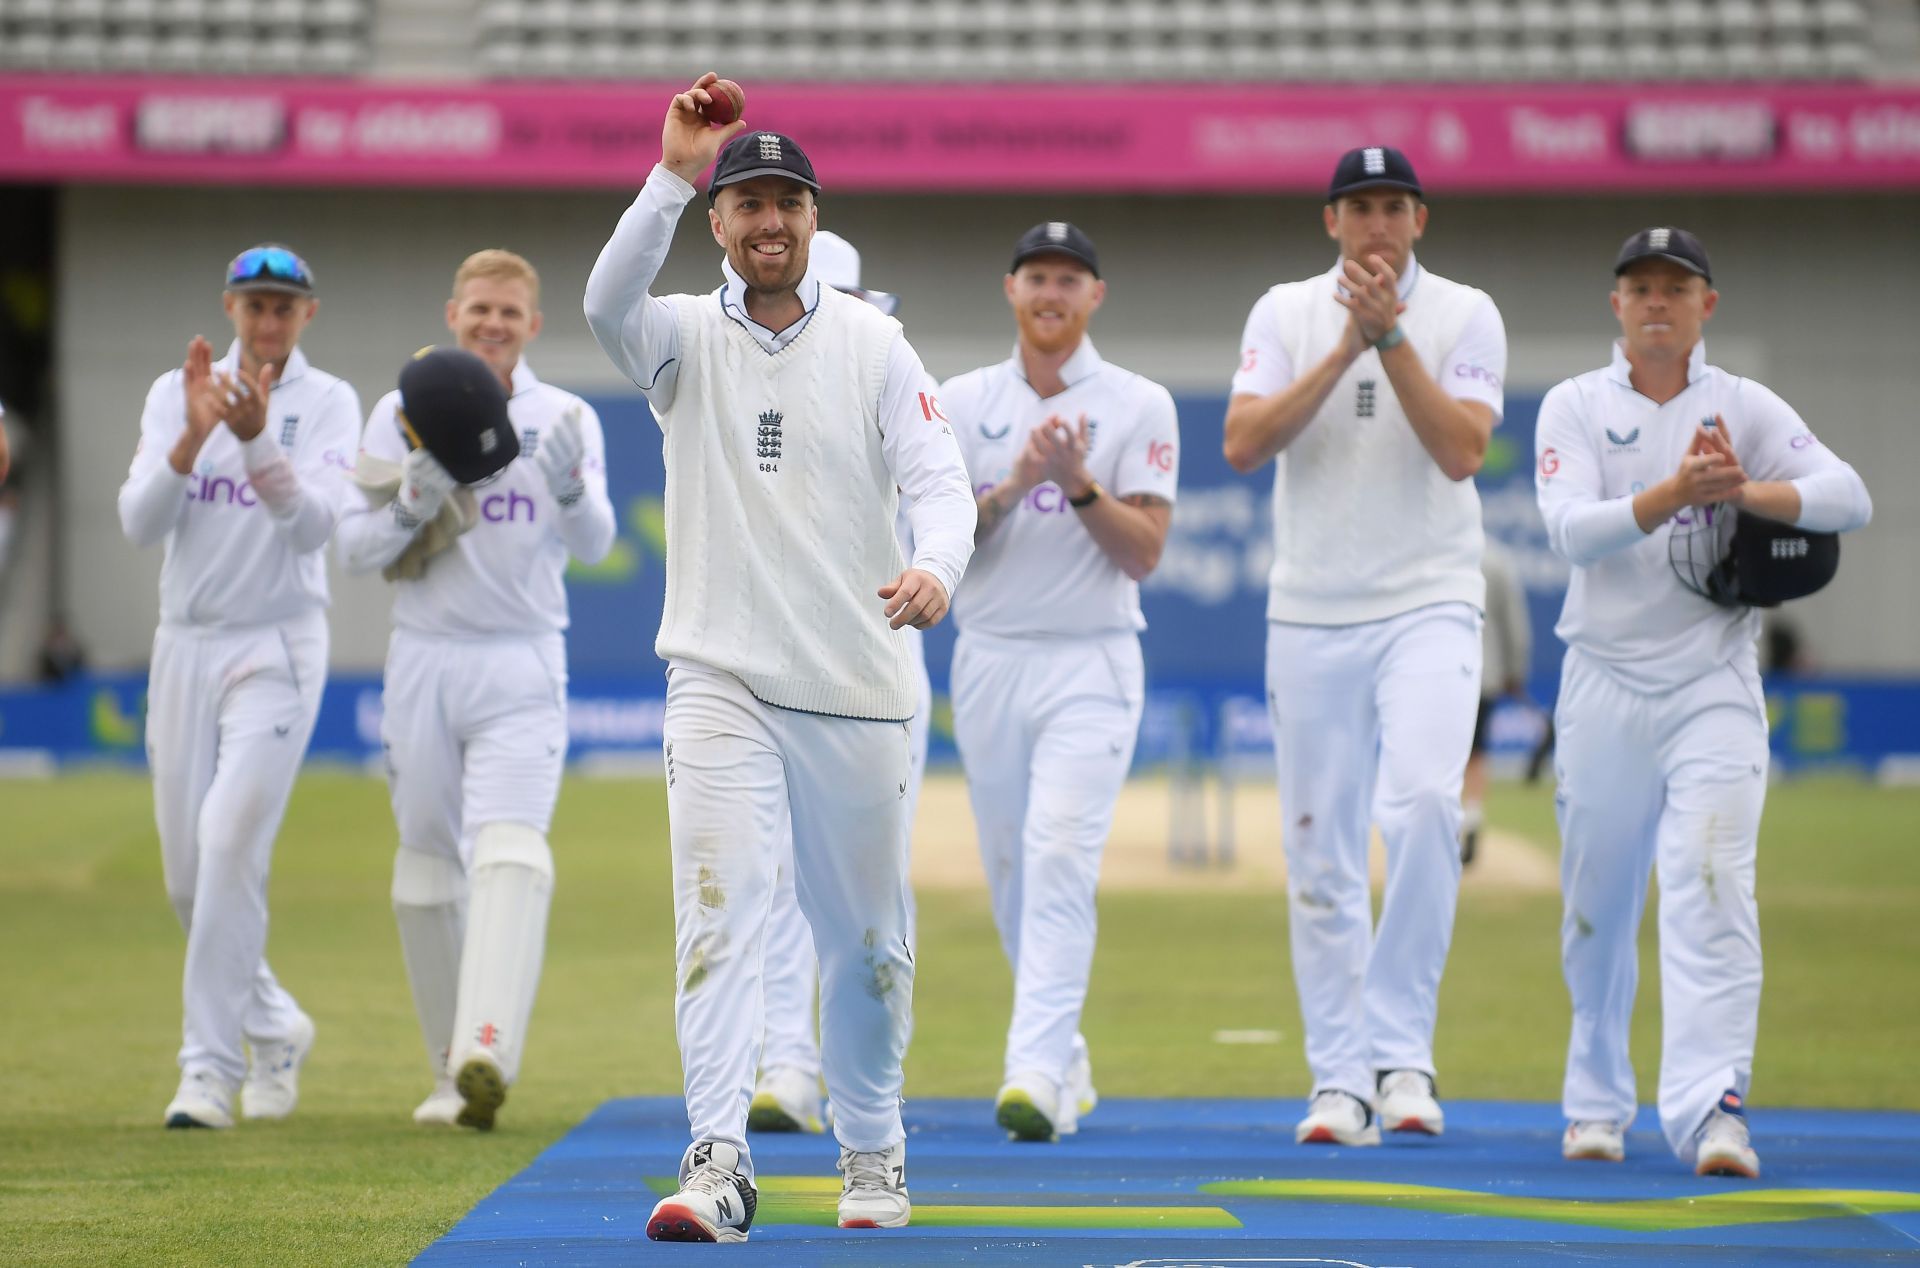 Jack Leach claimed his maiden 10-wicket haul in Tests (Credits: Getty)